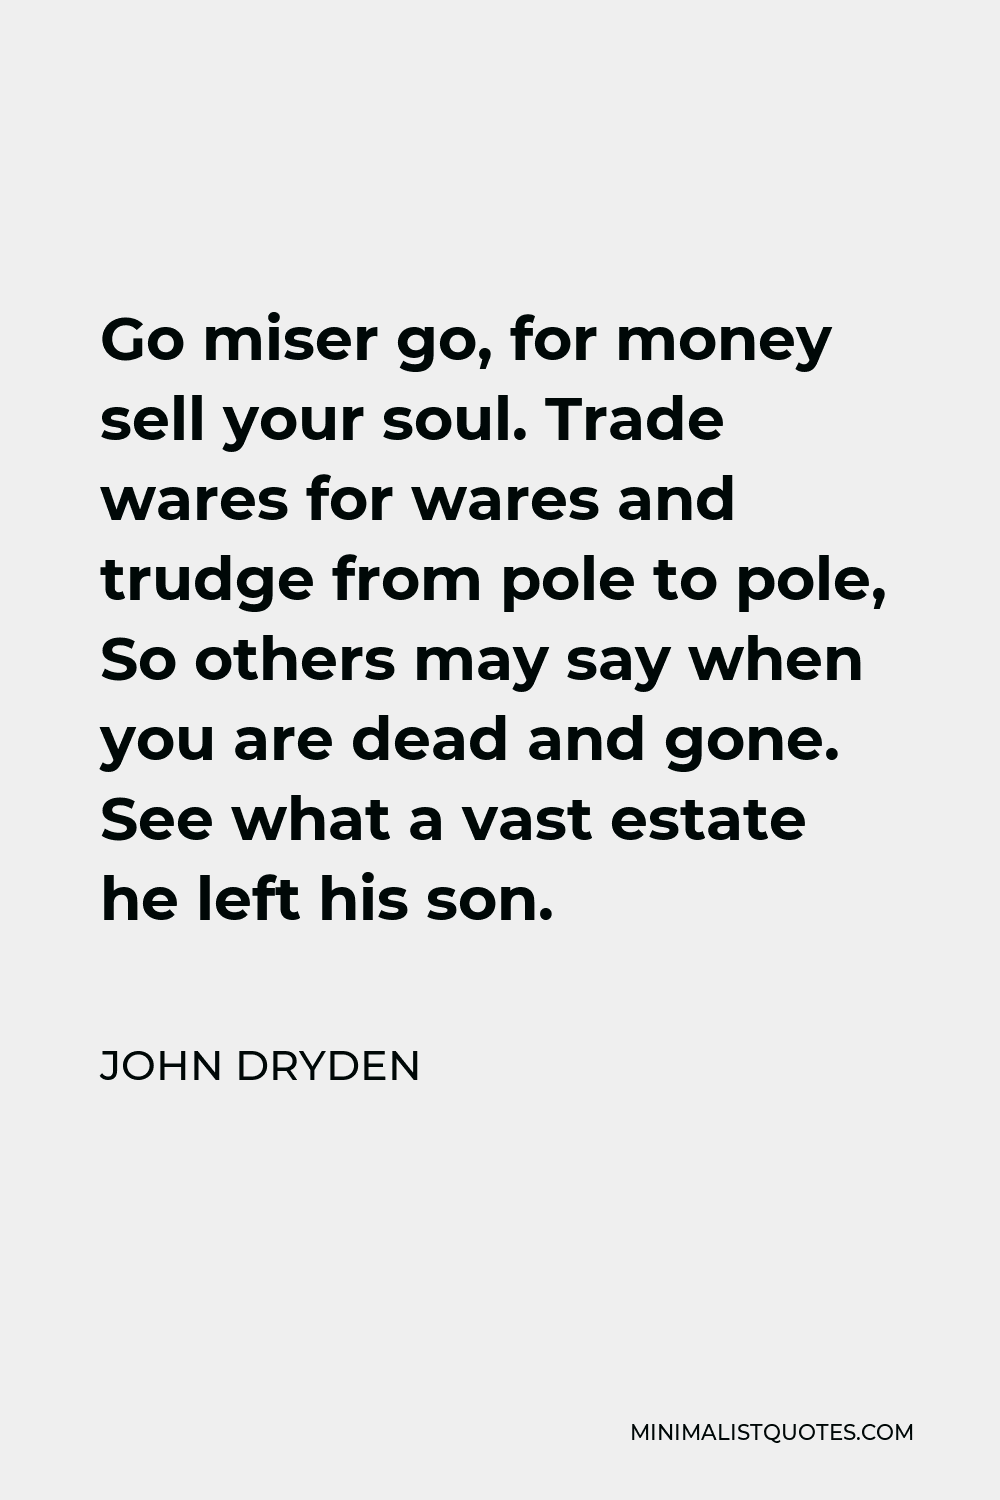 John Dryden Quote - Go miser go, for money sell your soul. Trade wares for wares and trudge from pole to pole, So others may say when you are dead and gone. See what a vast estate he left his son.